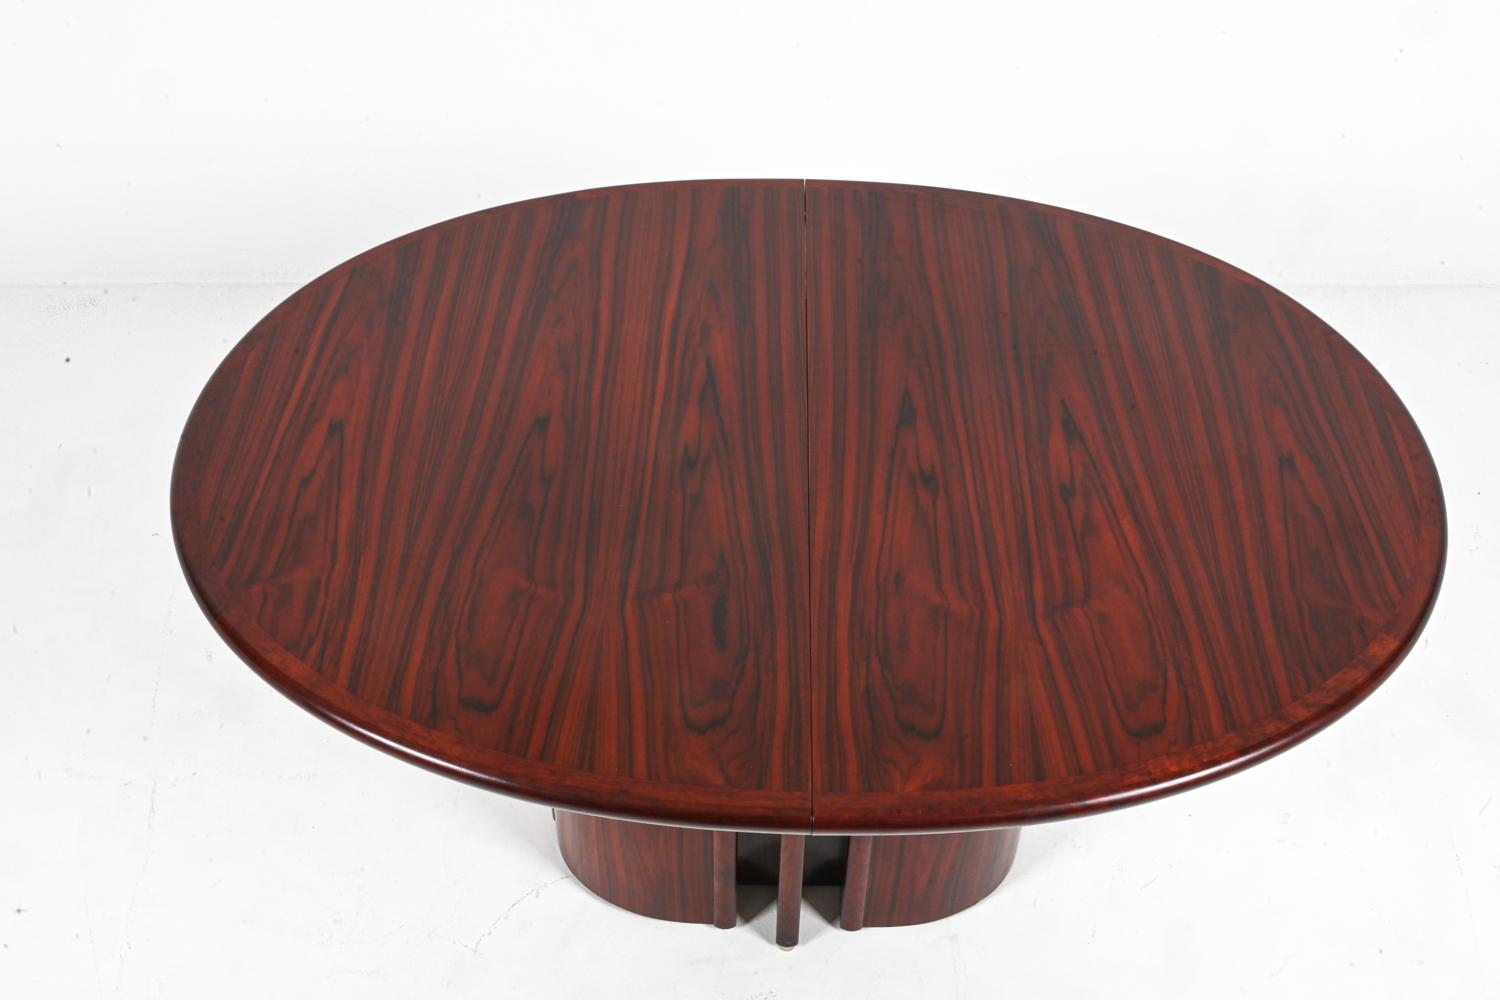 Art Deco-Style Butterfly Leaf Dining Table by Skovby, Denmark 1970's For Sale 4